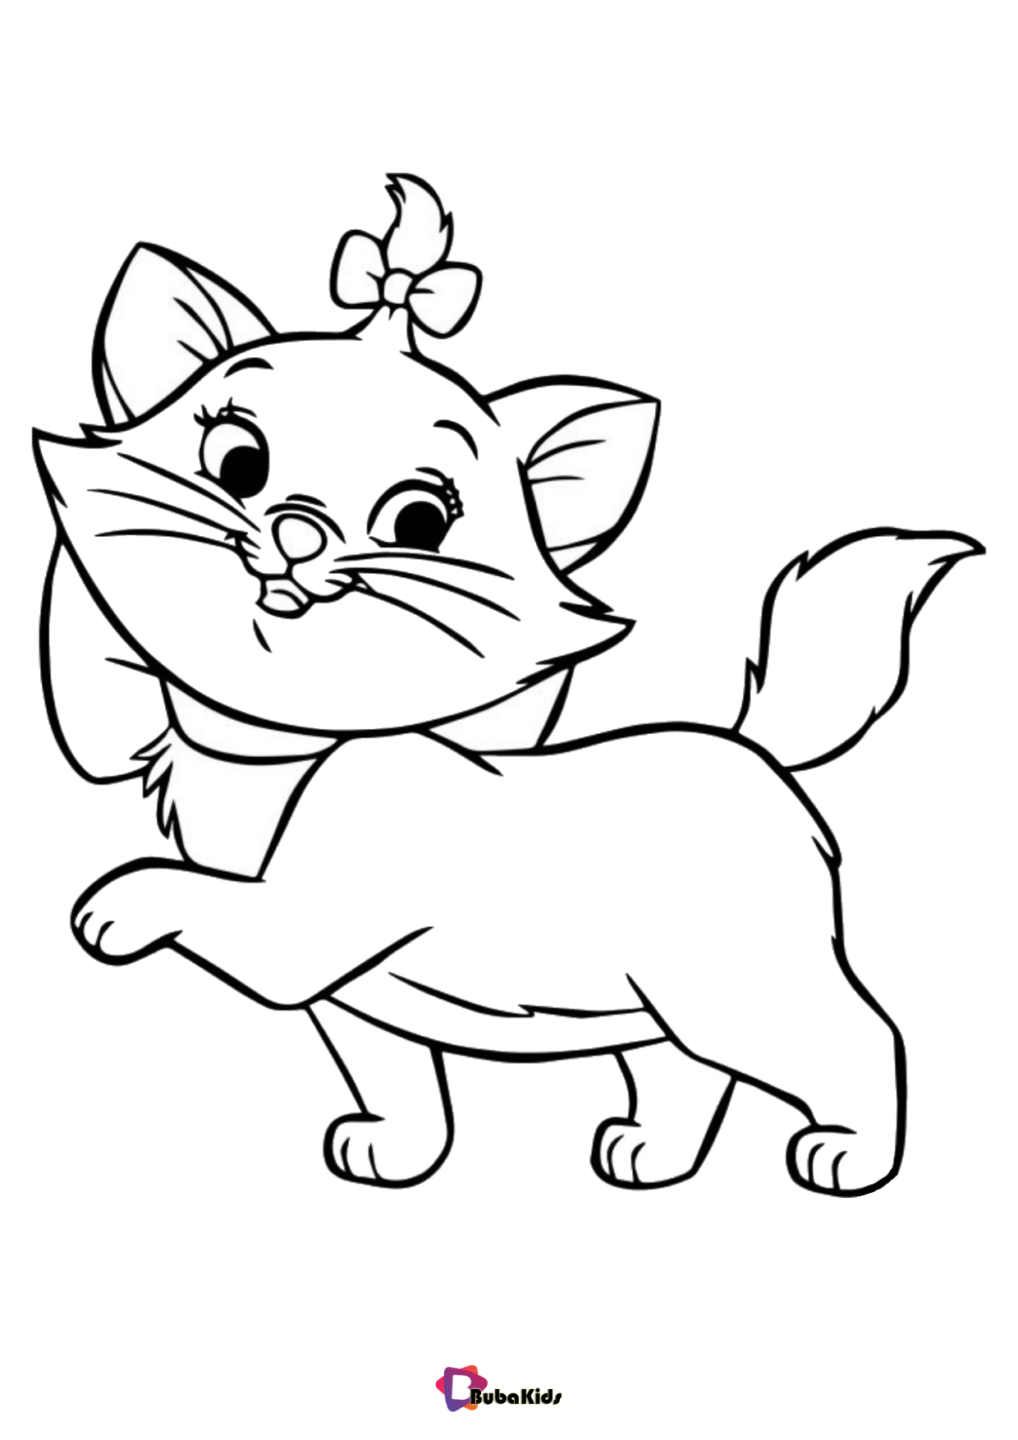 Cut lovely cat coloring page | BubaKids.com